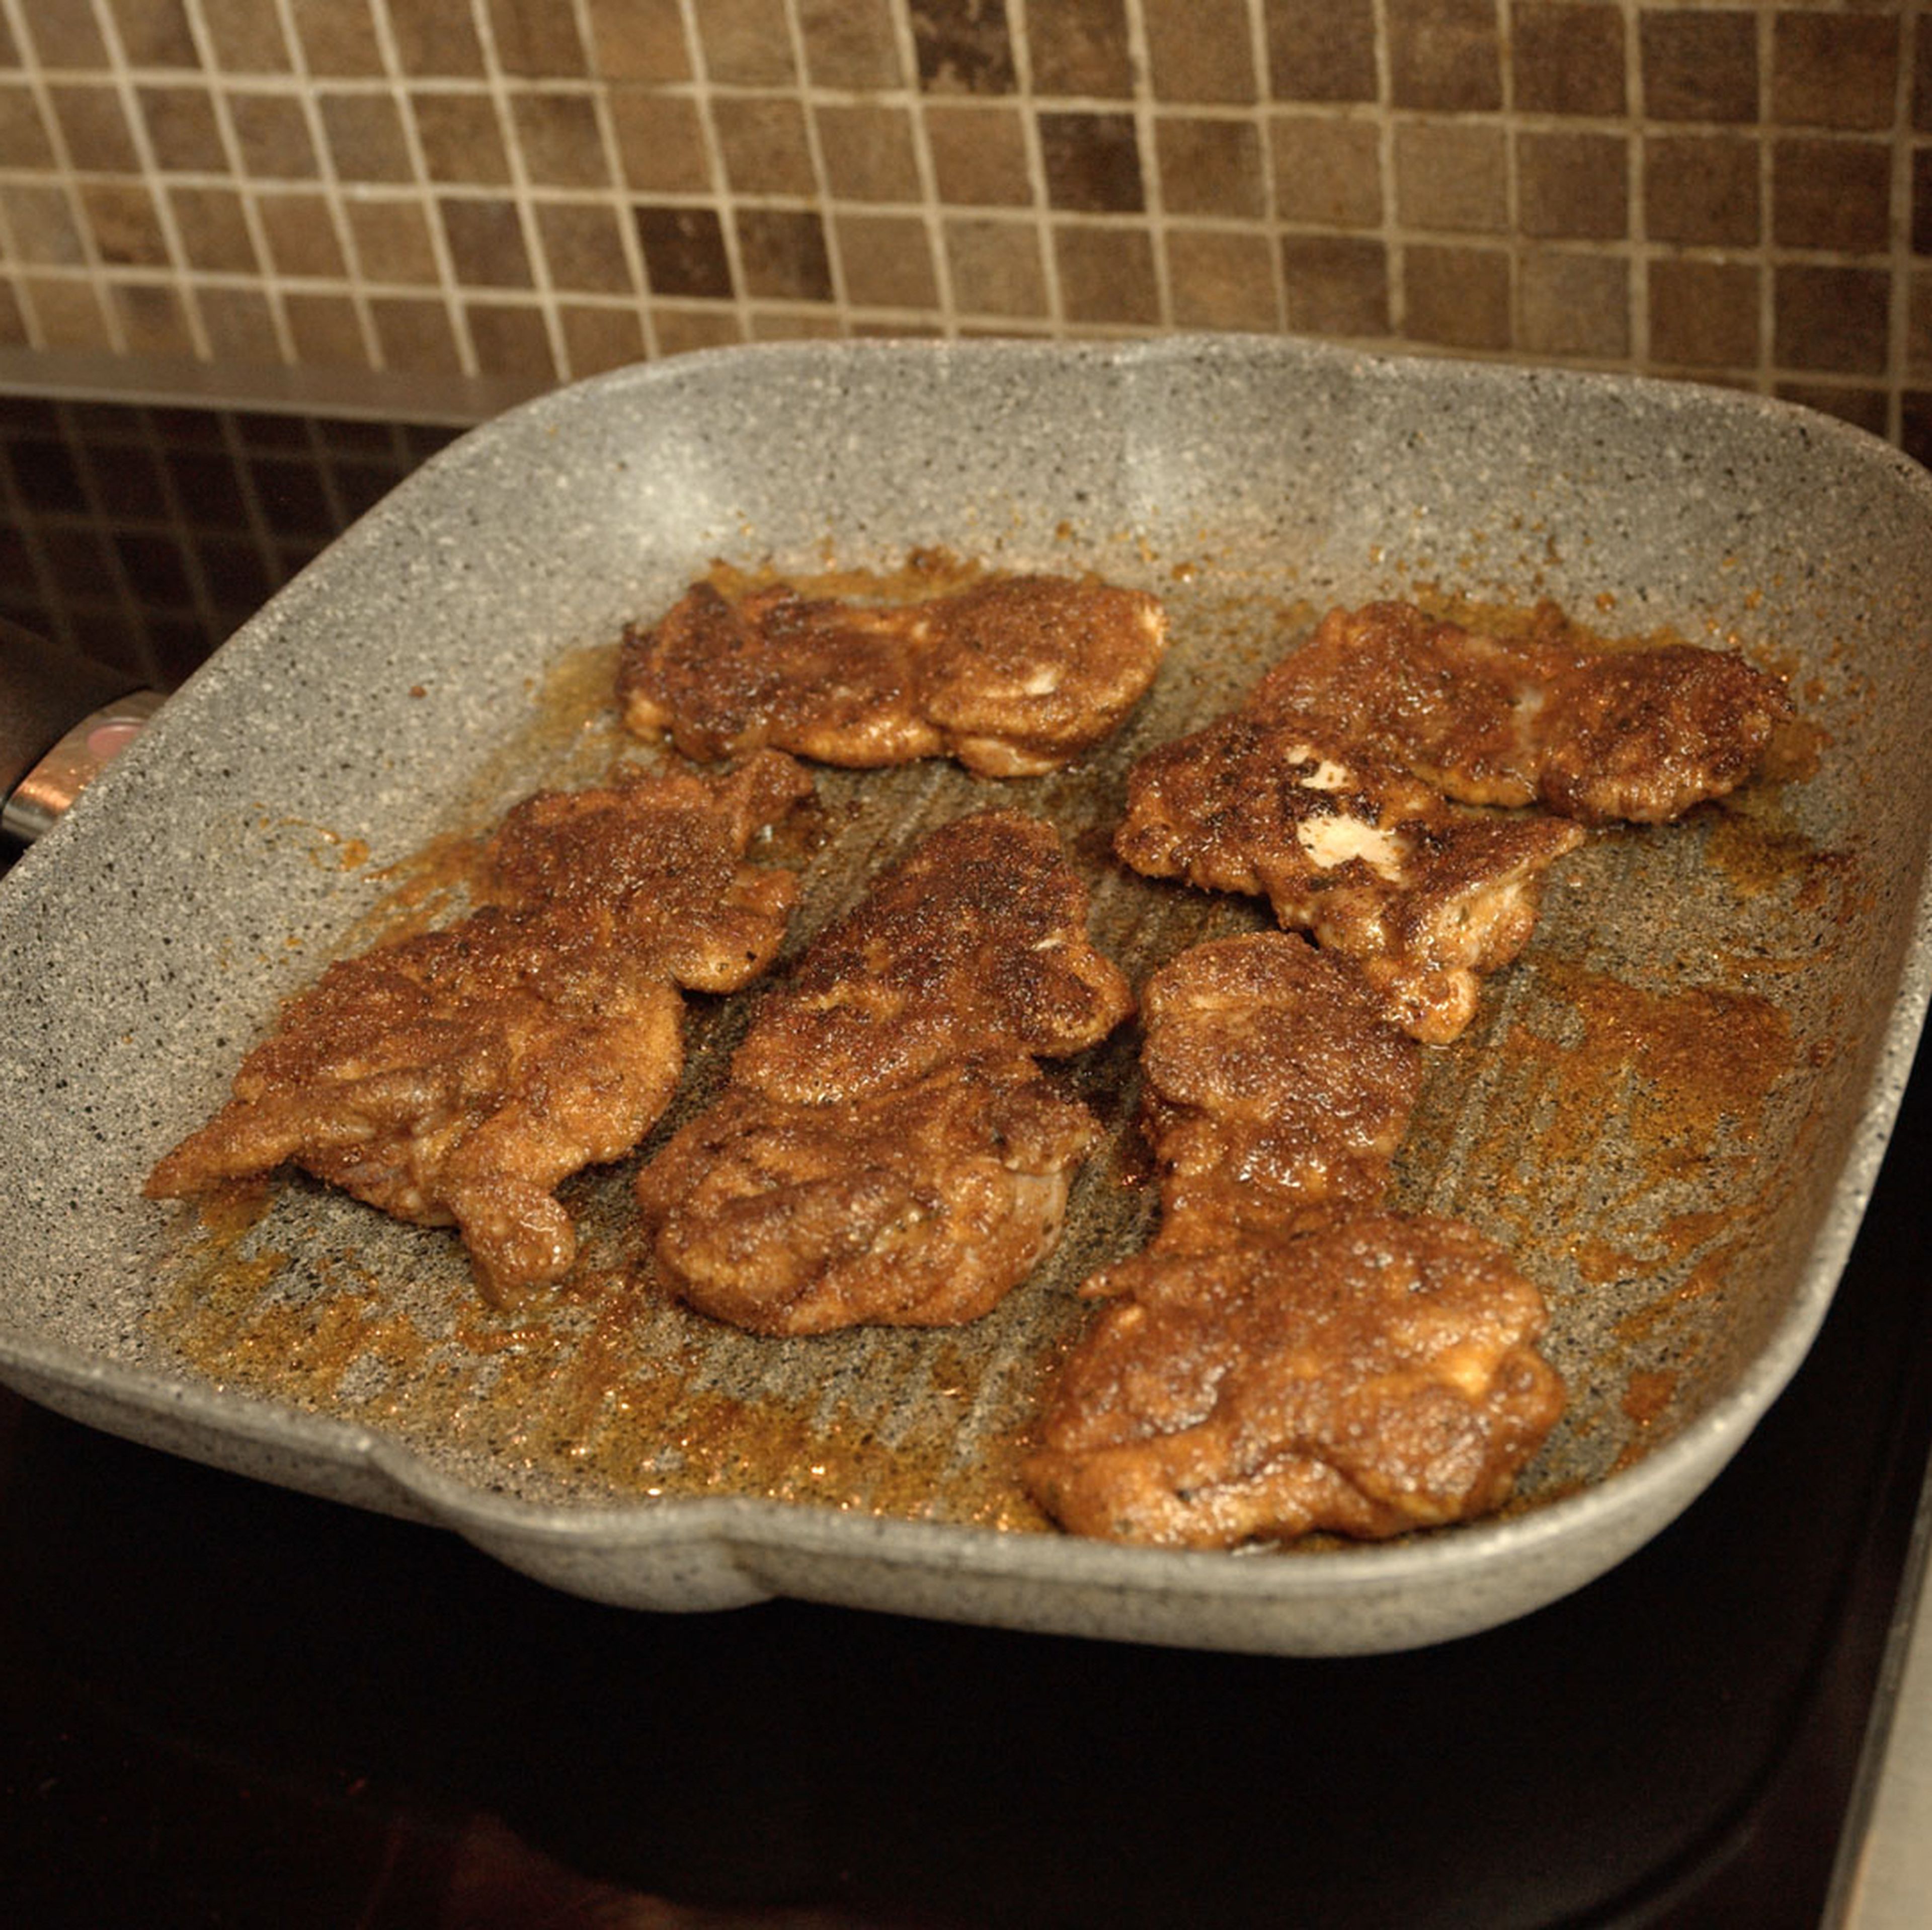 Preheat a grill or frying pan (medium-high heat). Cook chicken thighs 2.5 minutes per side or until fully cooked